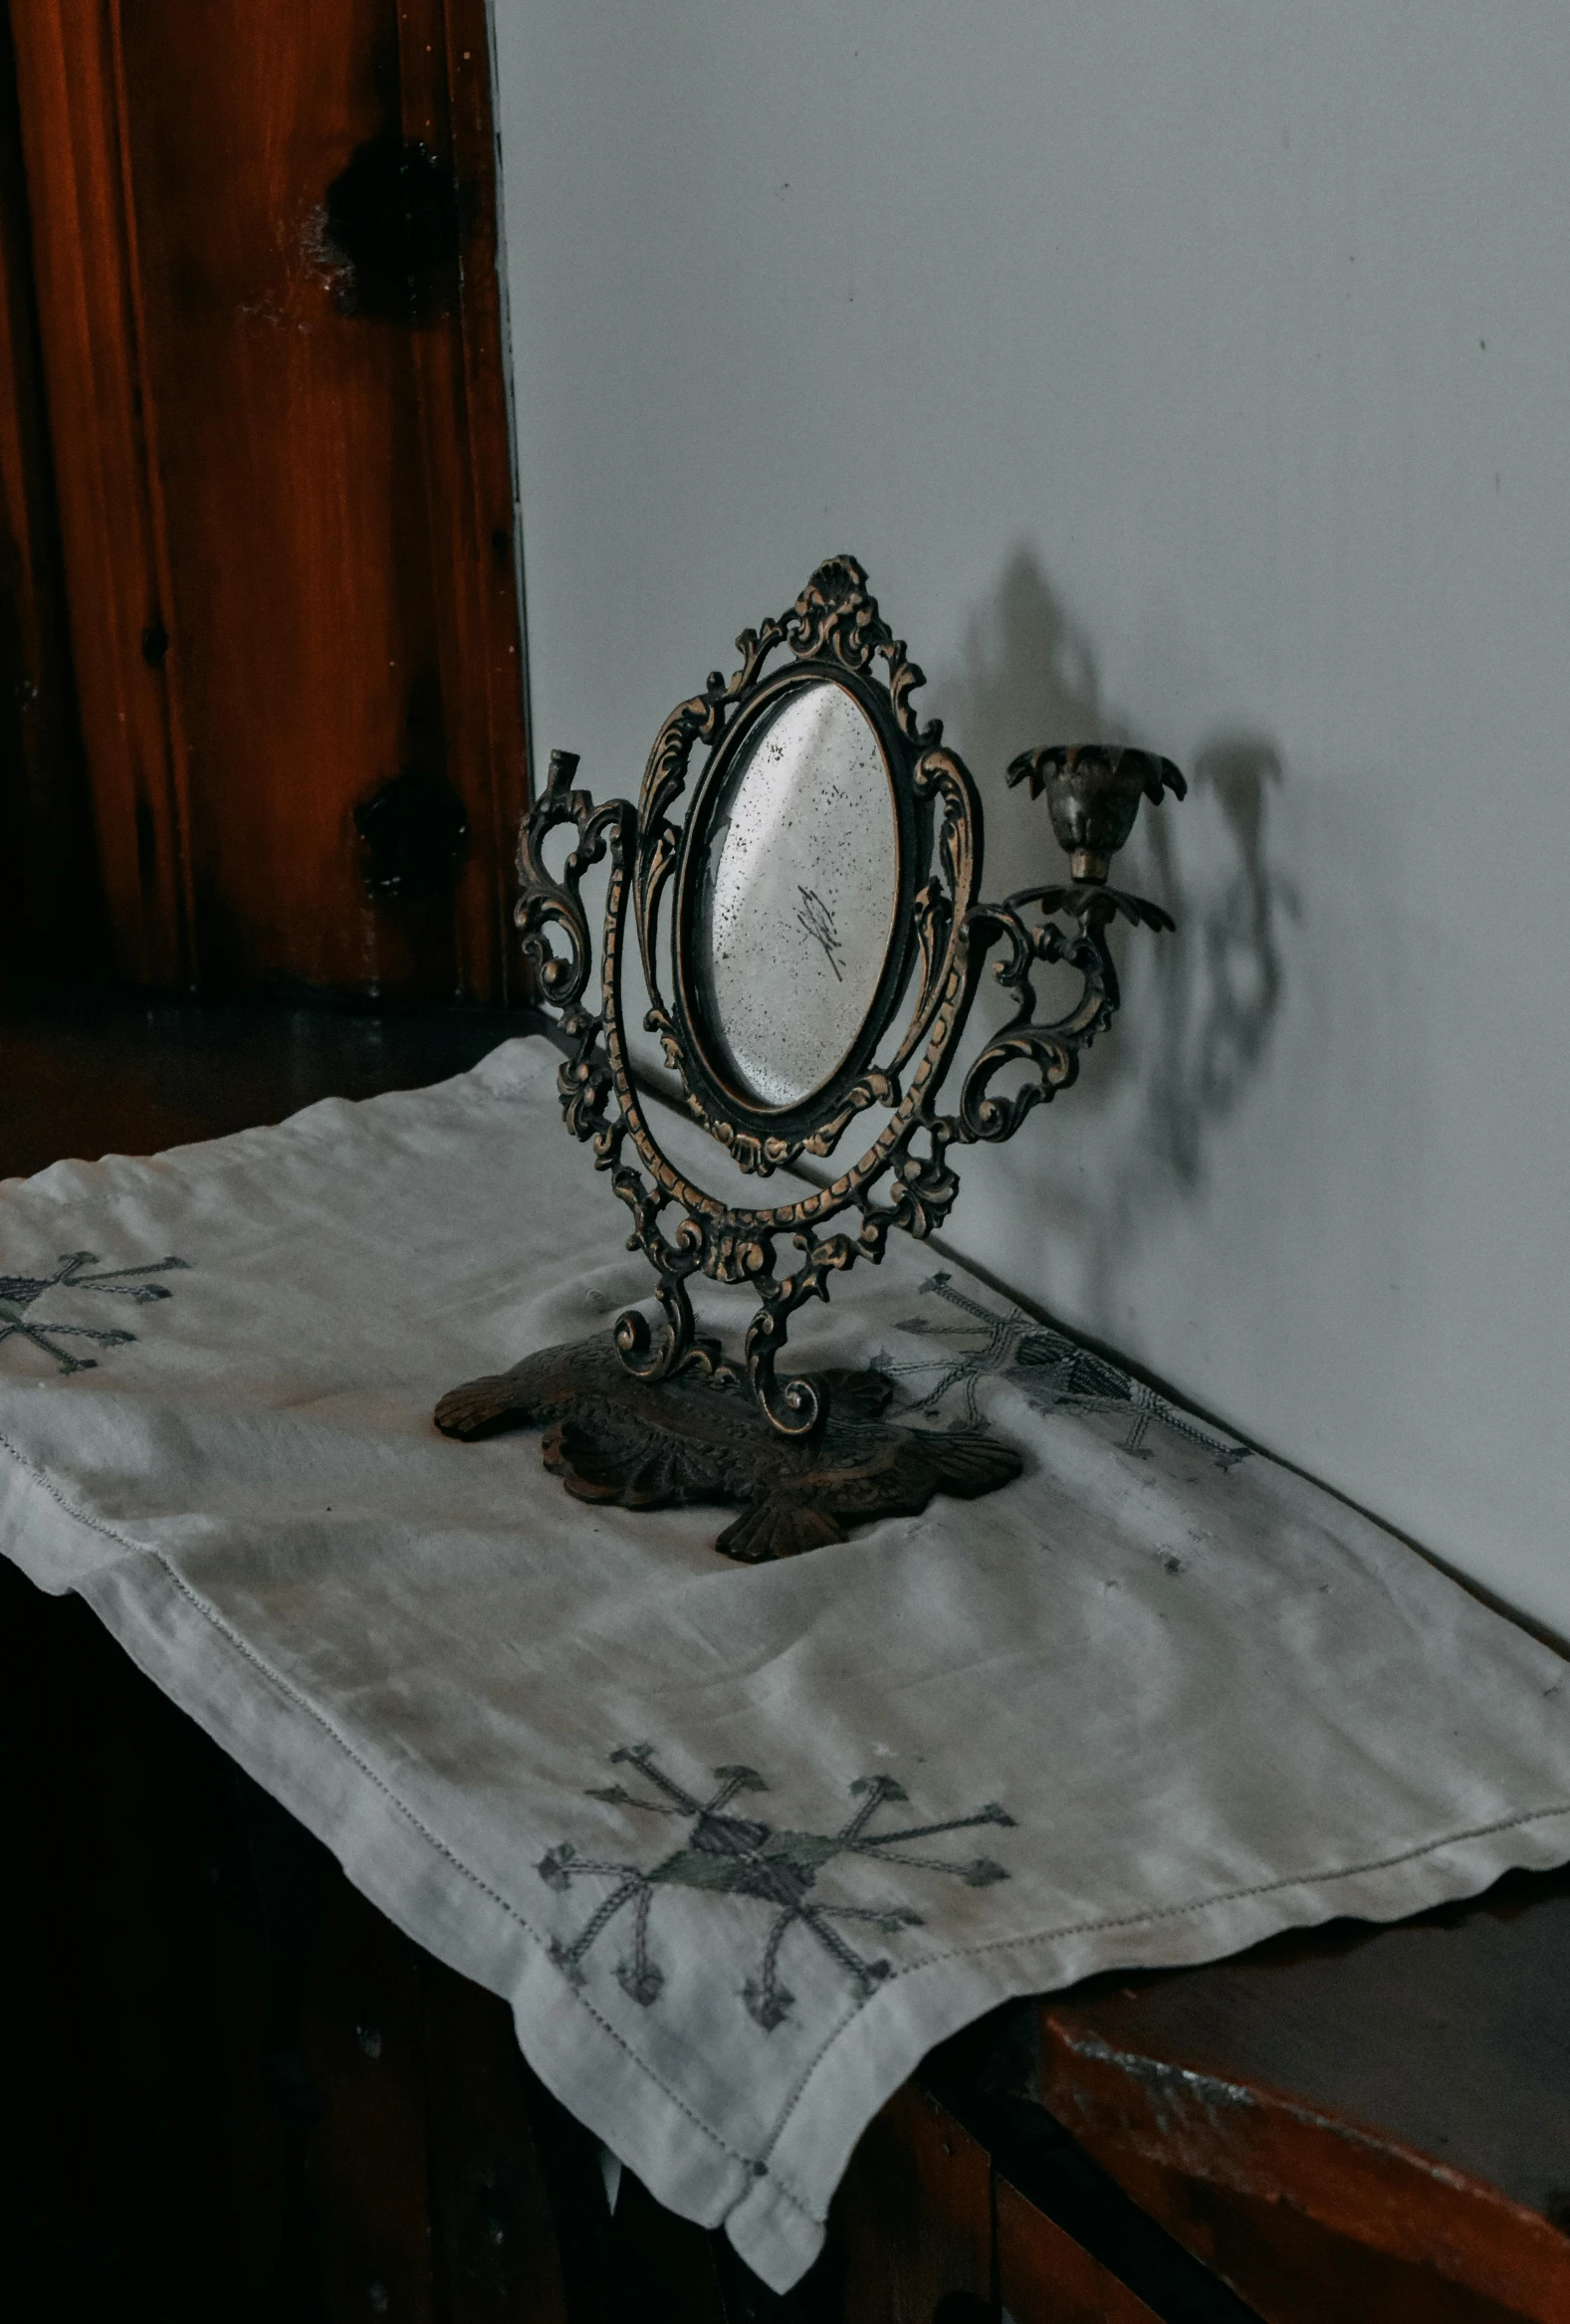 an antique looking mirror sits on top of a towel